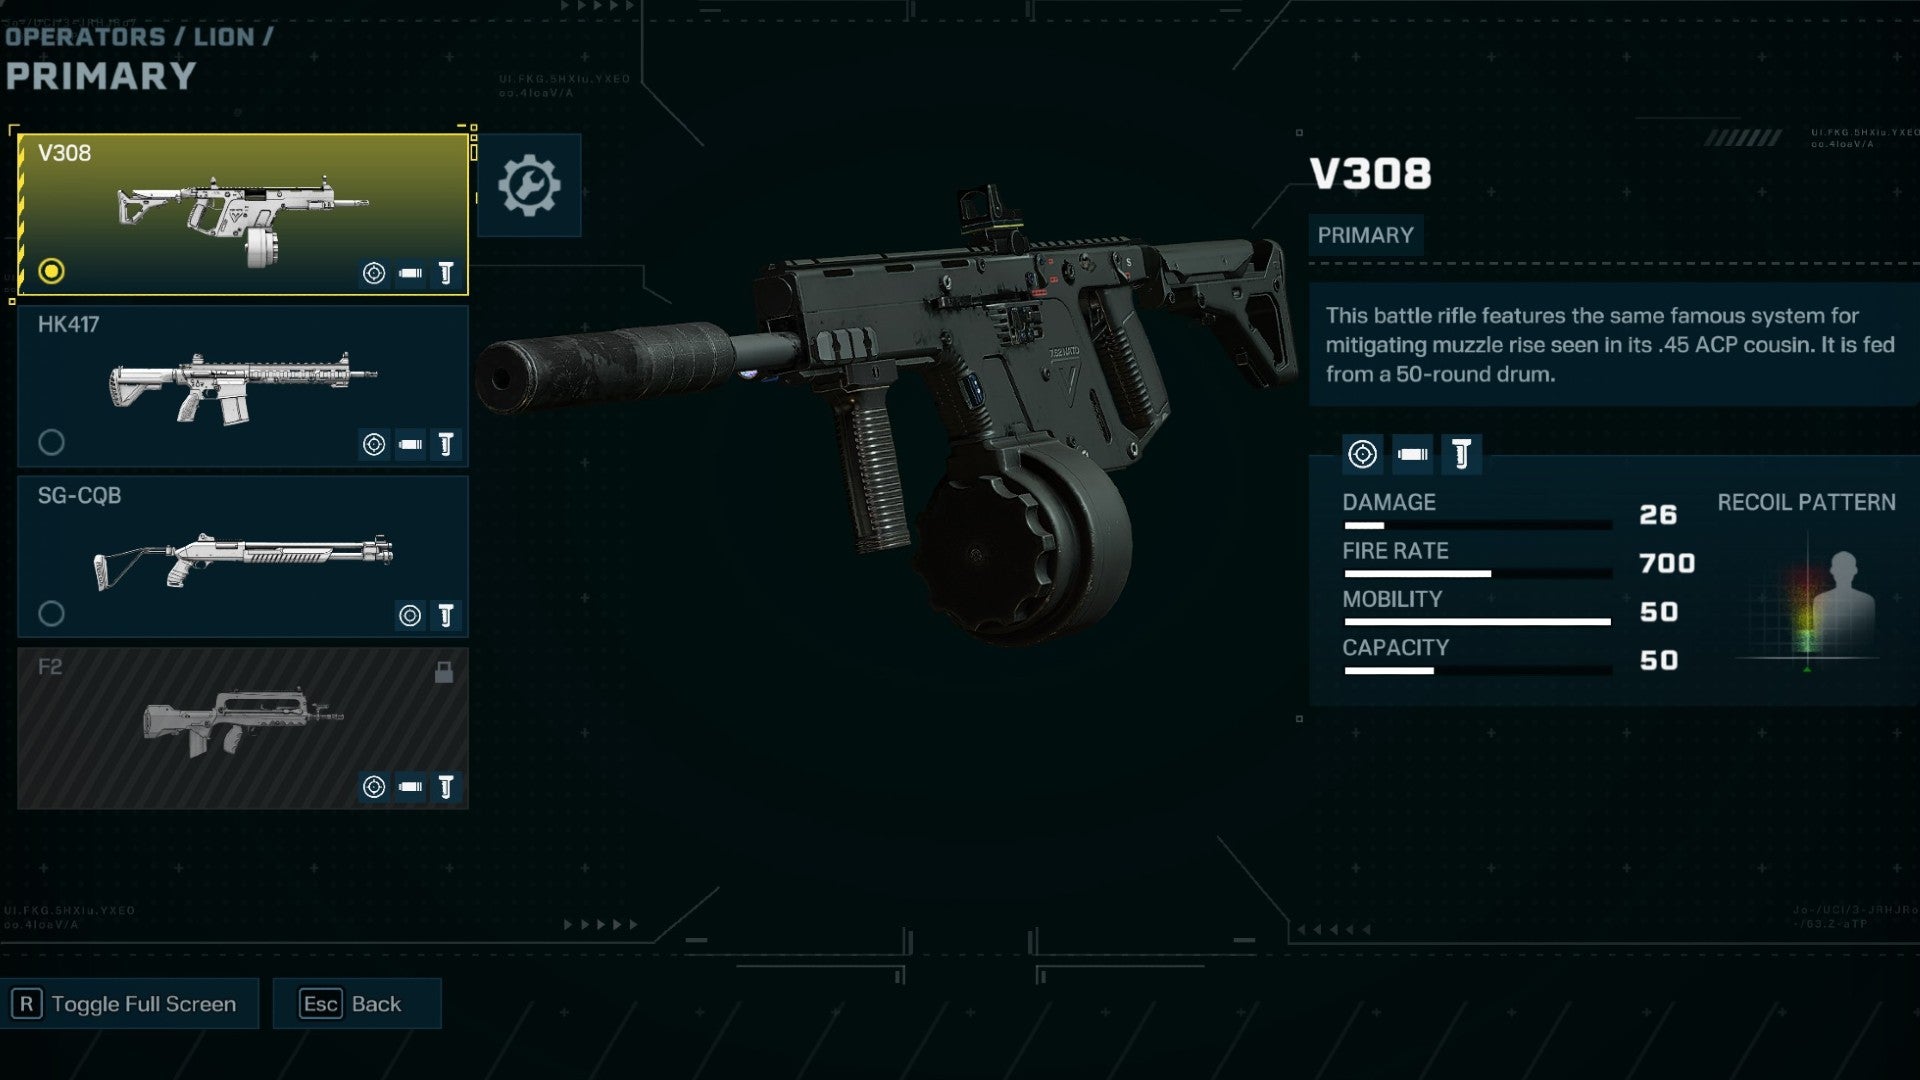 Rainbow Six Extraction V308 Assault Rifle in the loadout menu